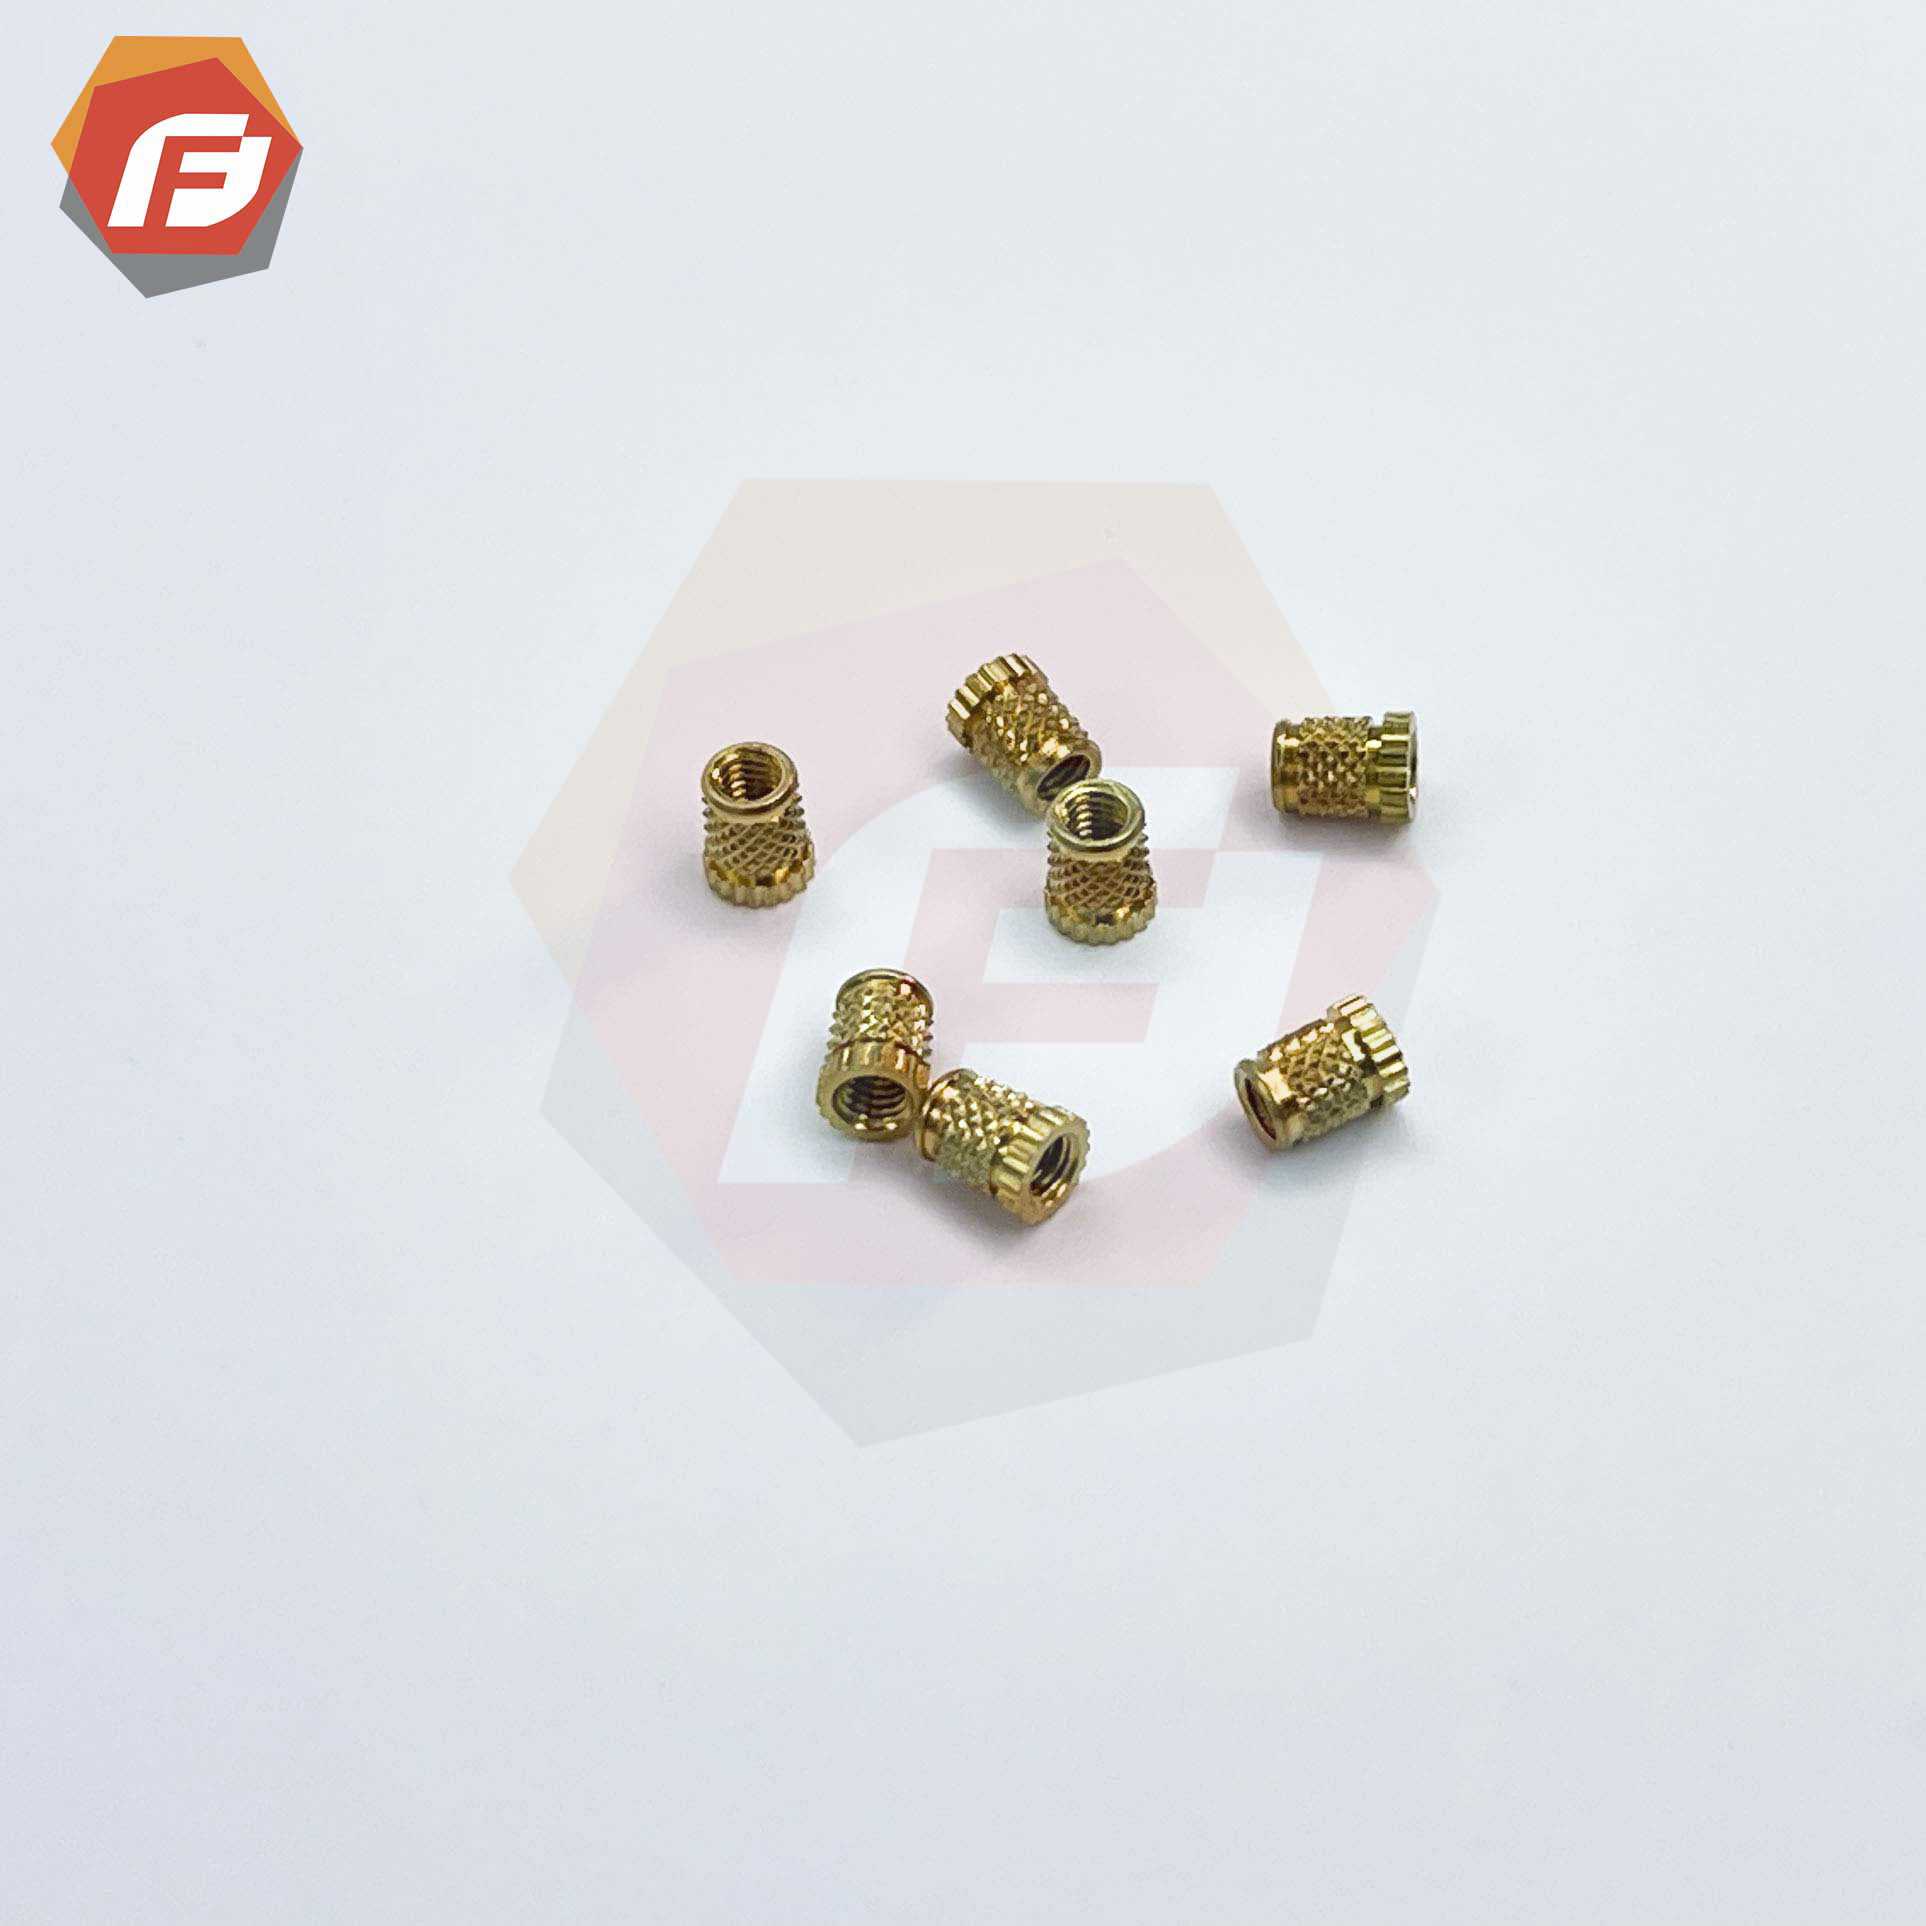 Brass Inserts For Plastic